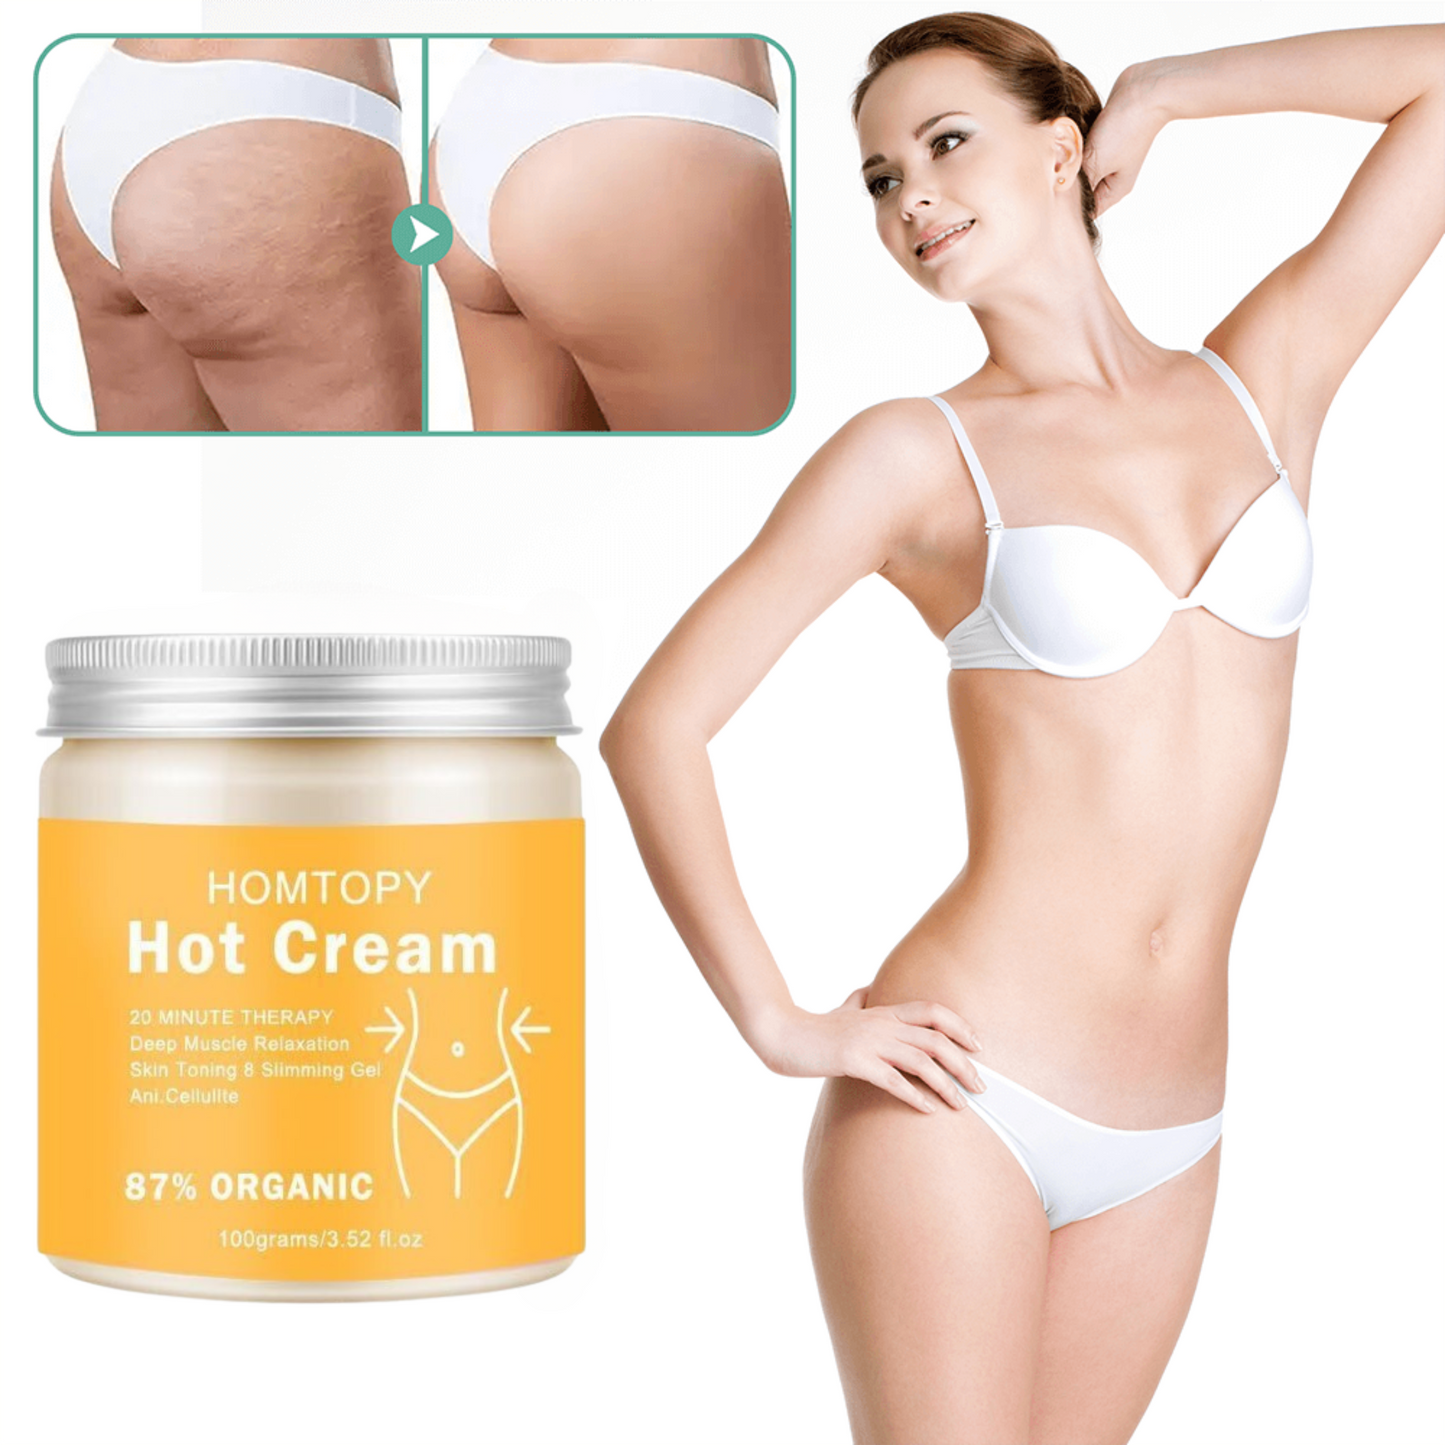 CelluFix® | Remove stubborn cellulite and get flawless skin in 4 weeks!